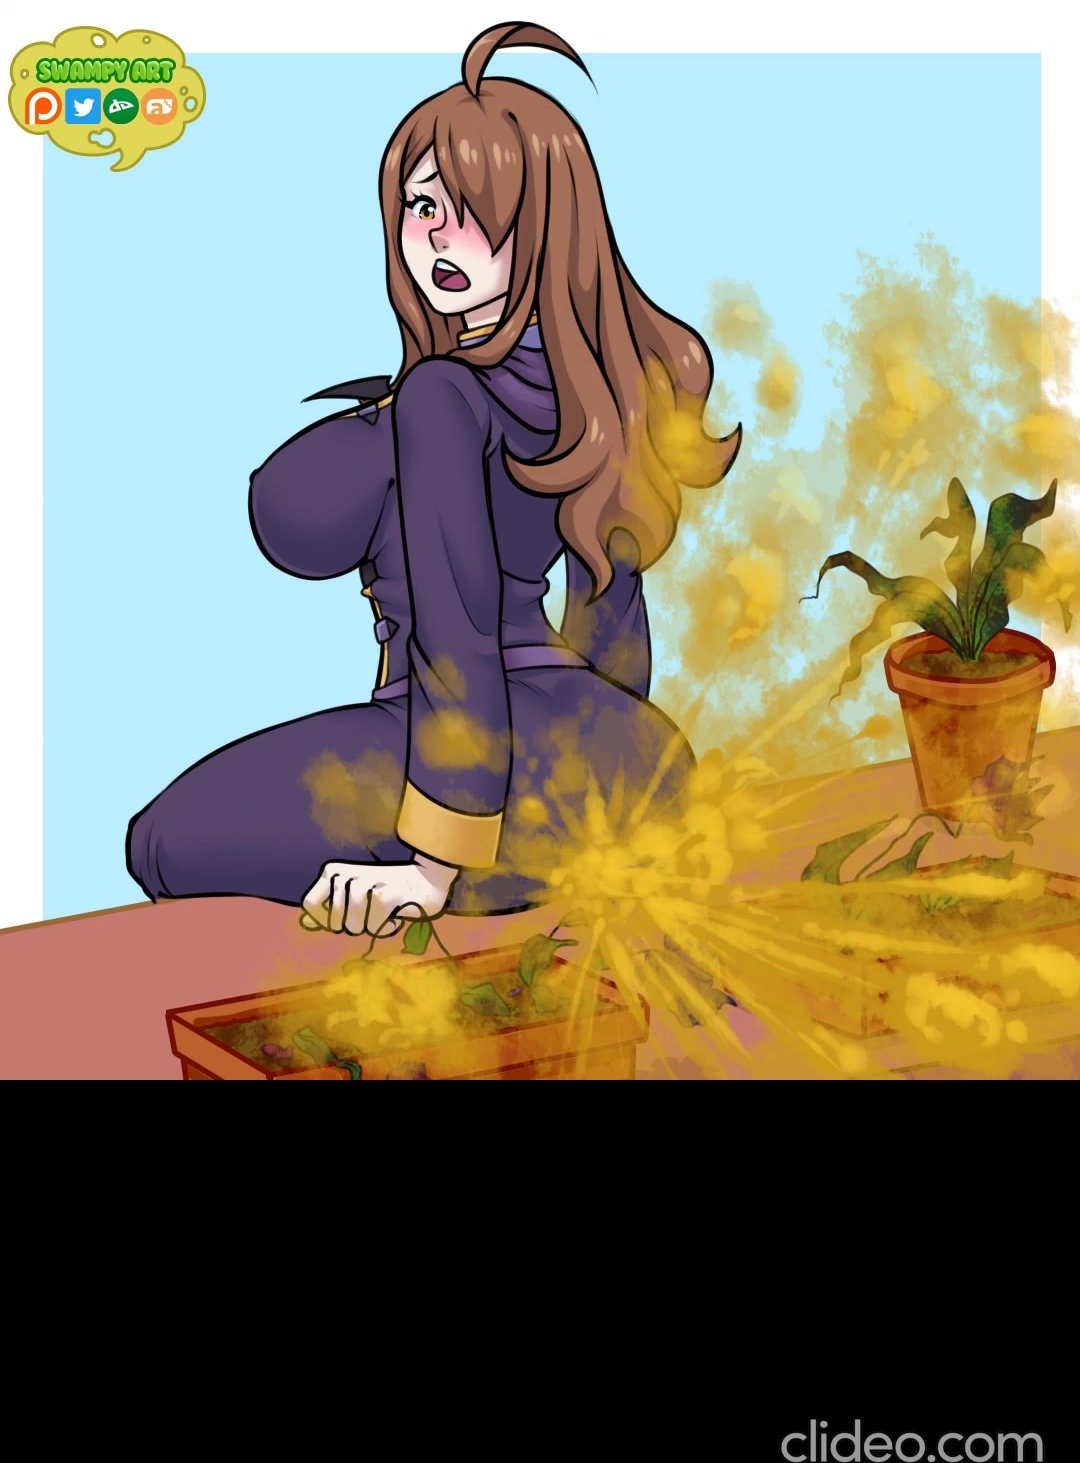 Girls Fart and poop on flowers hentai art collection